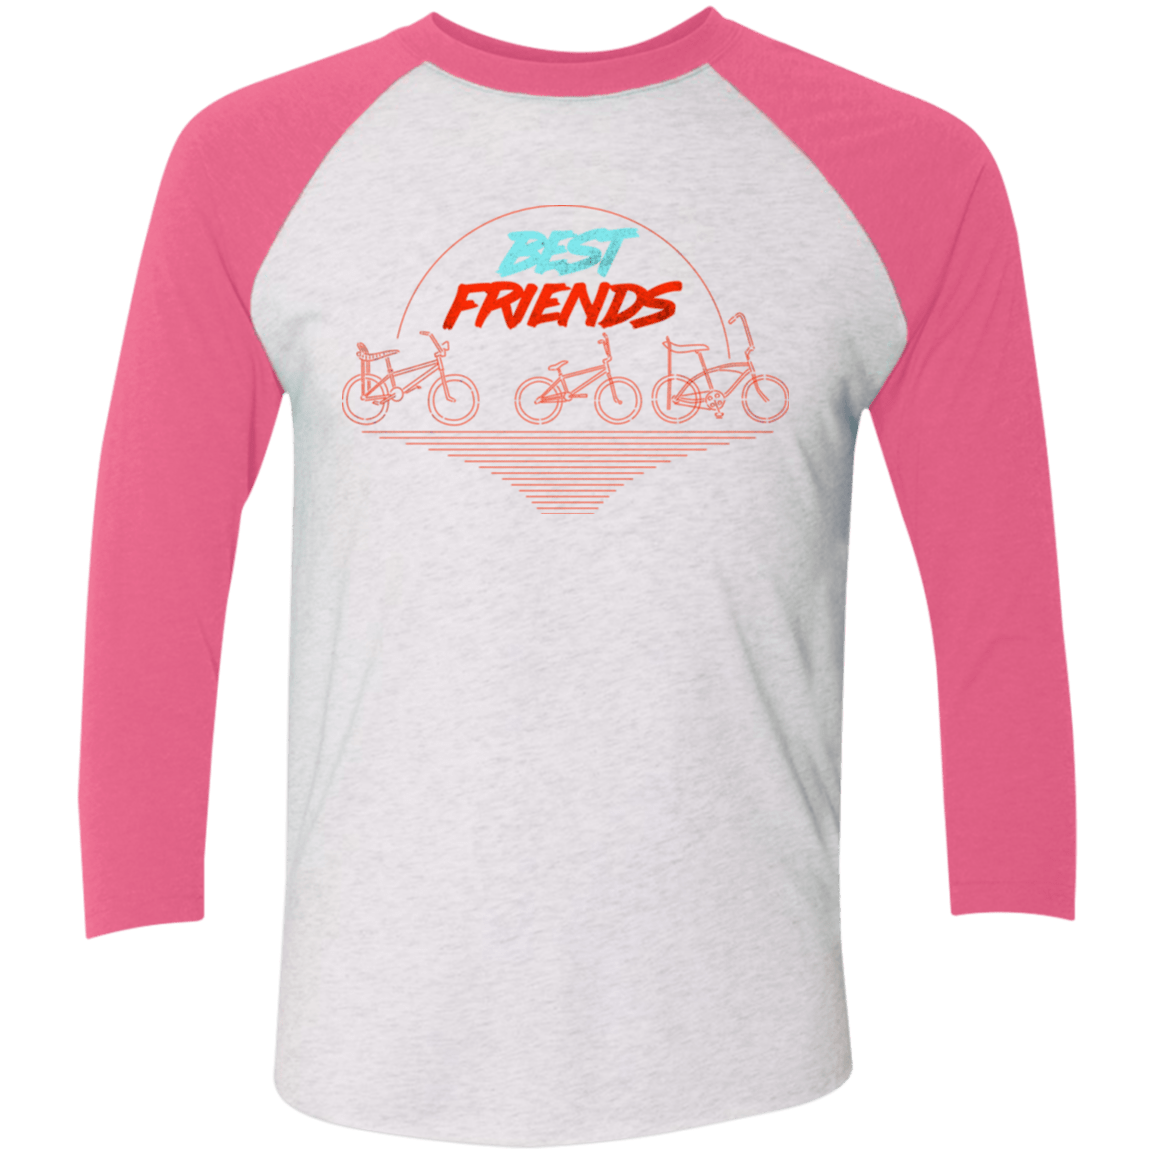 T-Shirts Heather White/Vintage Pink / X-Small Best Friends Men's Triblend 3/4 Sleeve